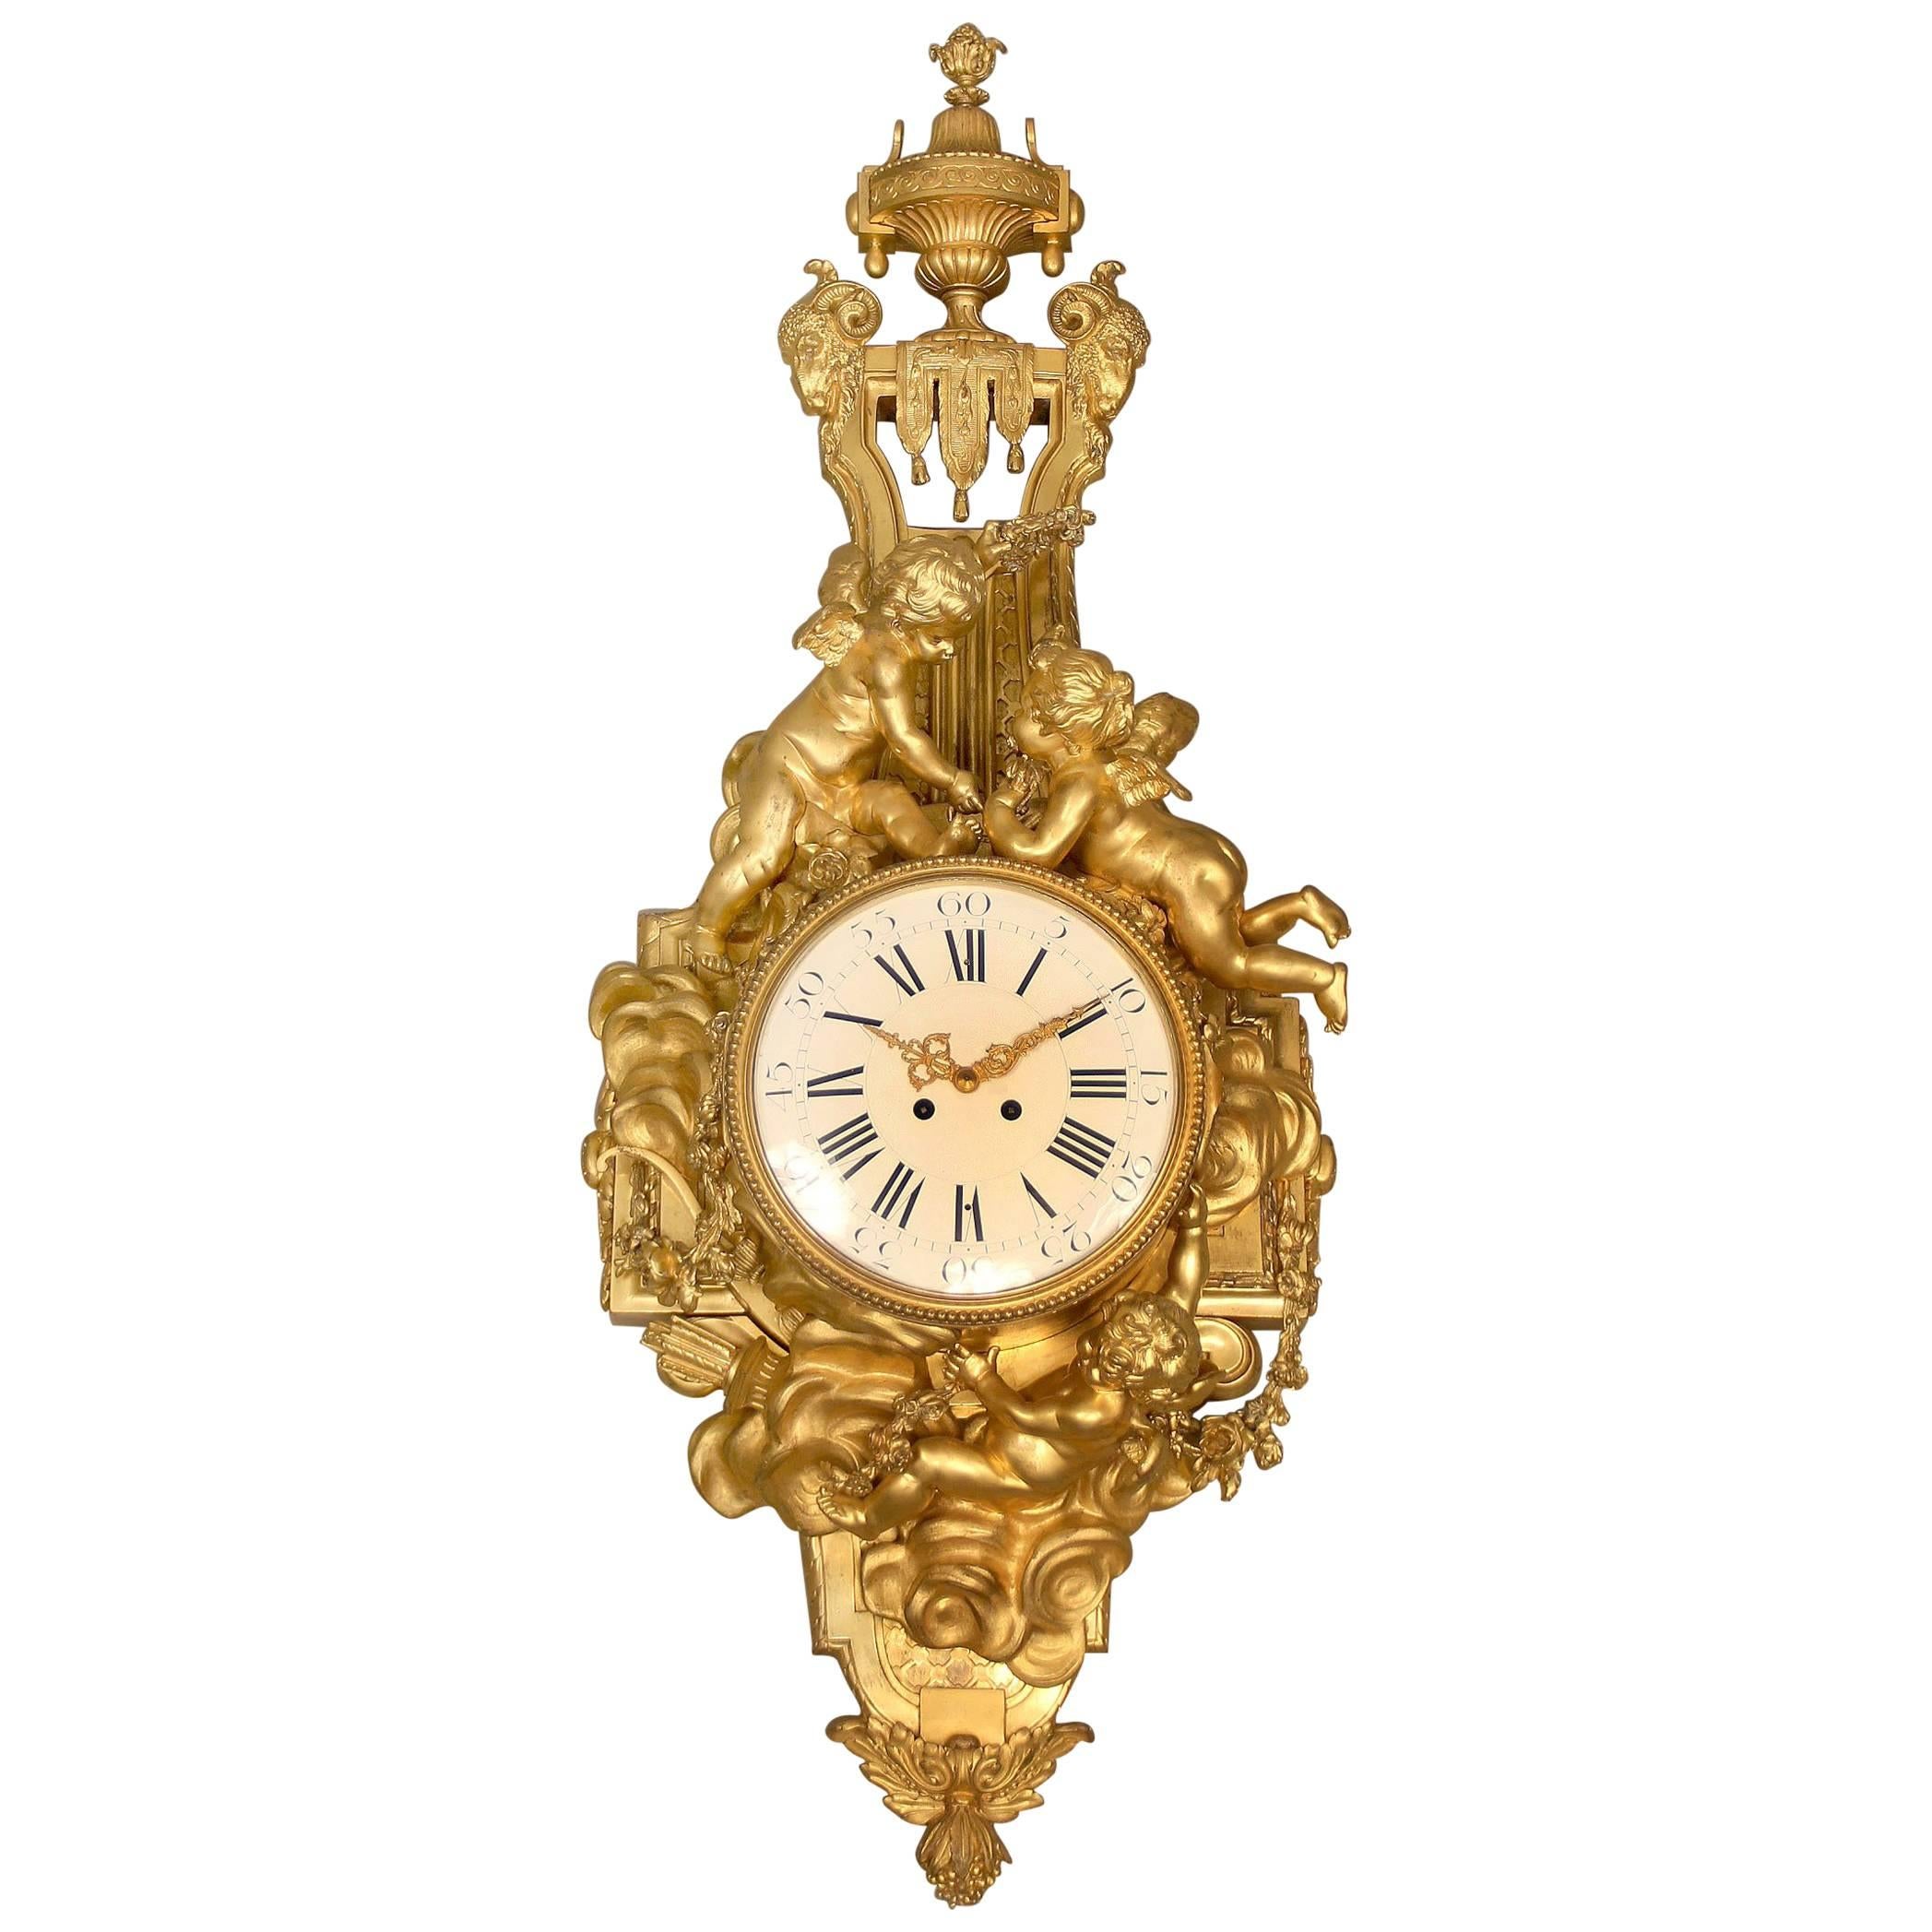 Unique Late 19th-Early 20th Century Gilt Bronze Cartel Clock by François Linke For Sale